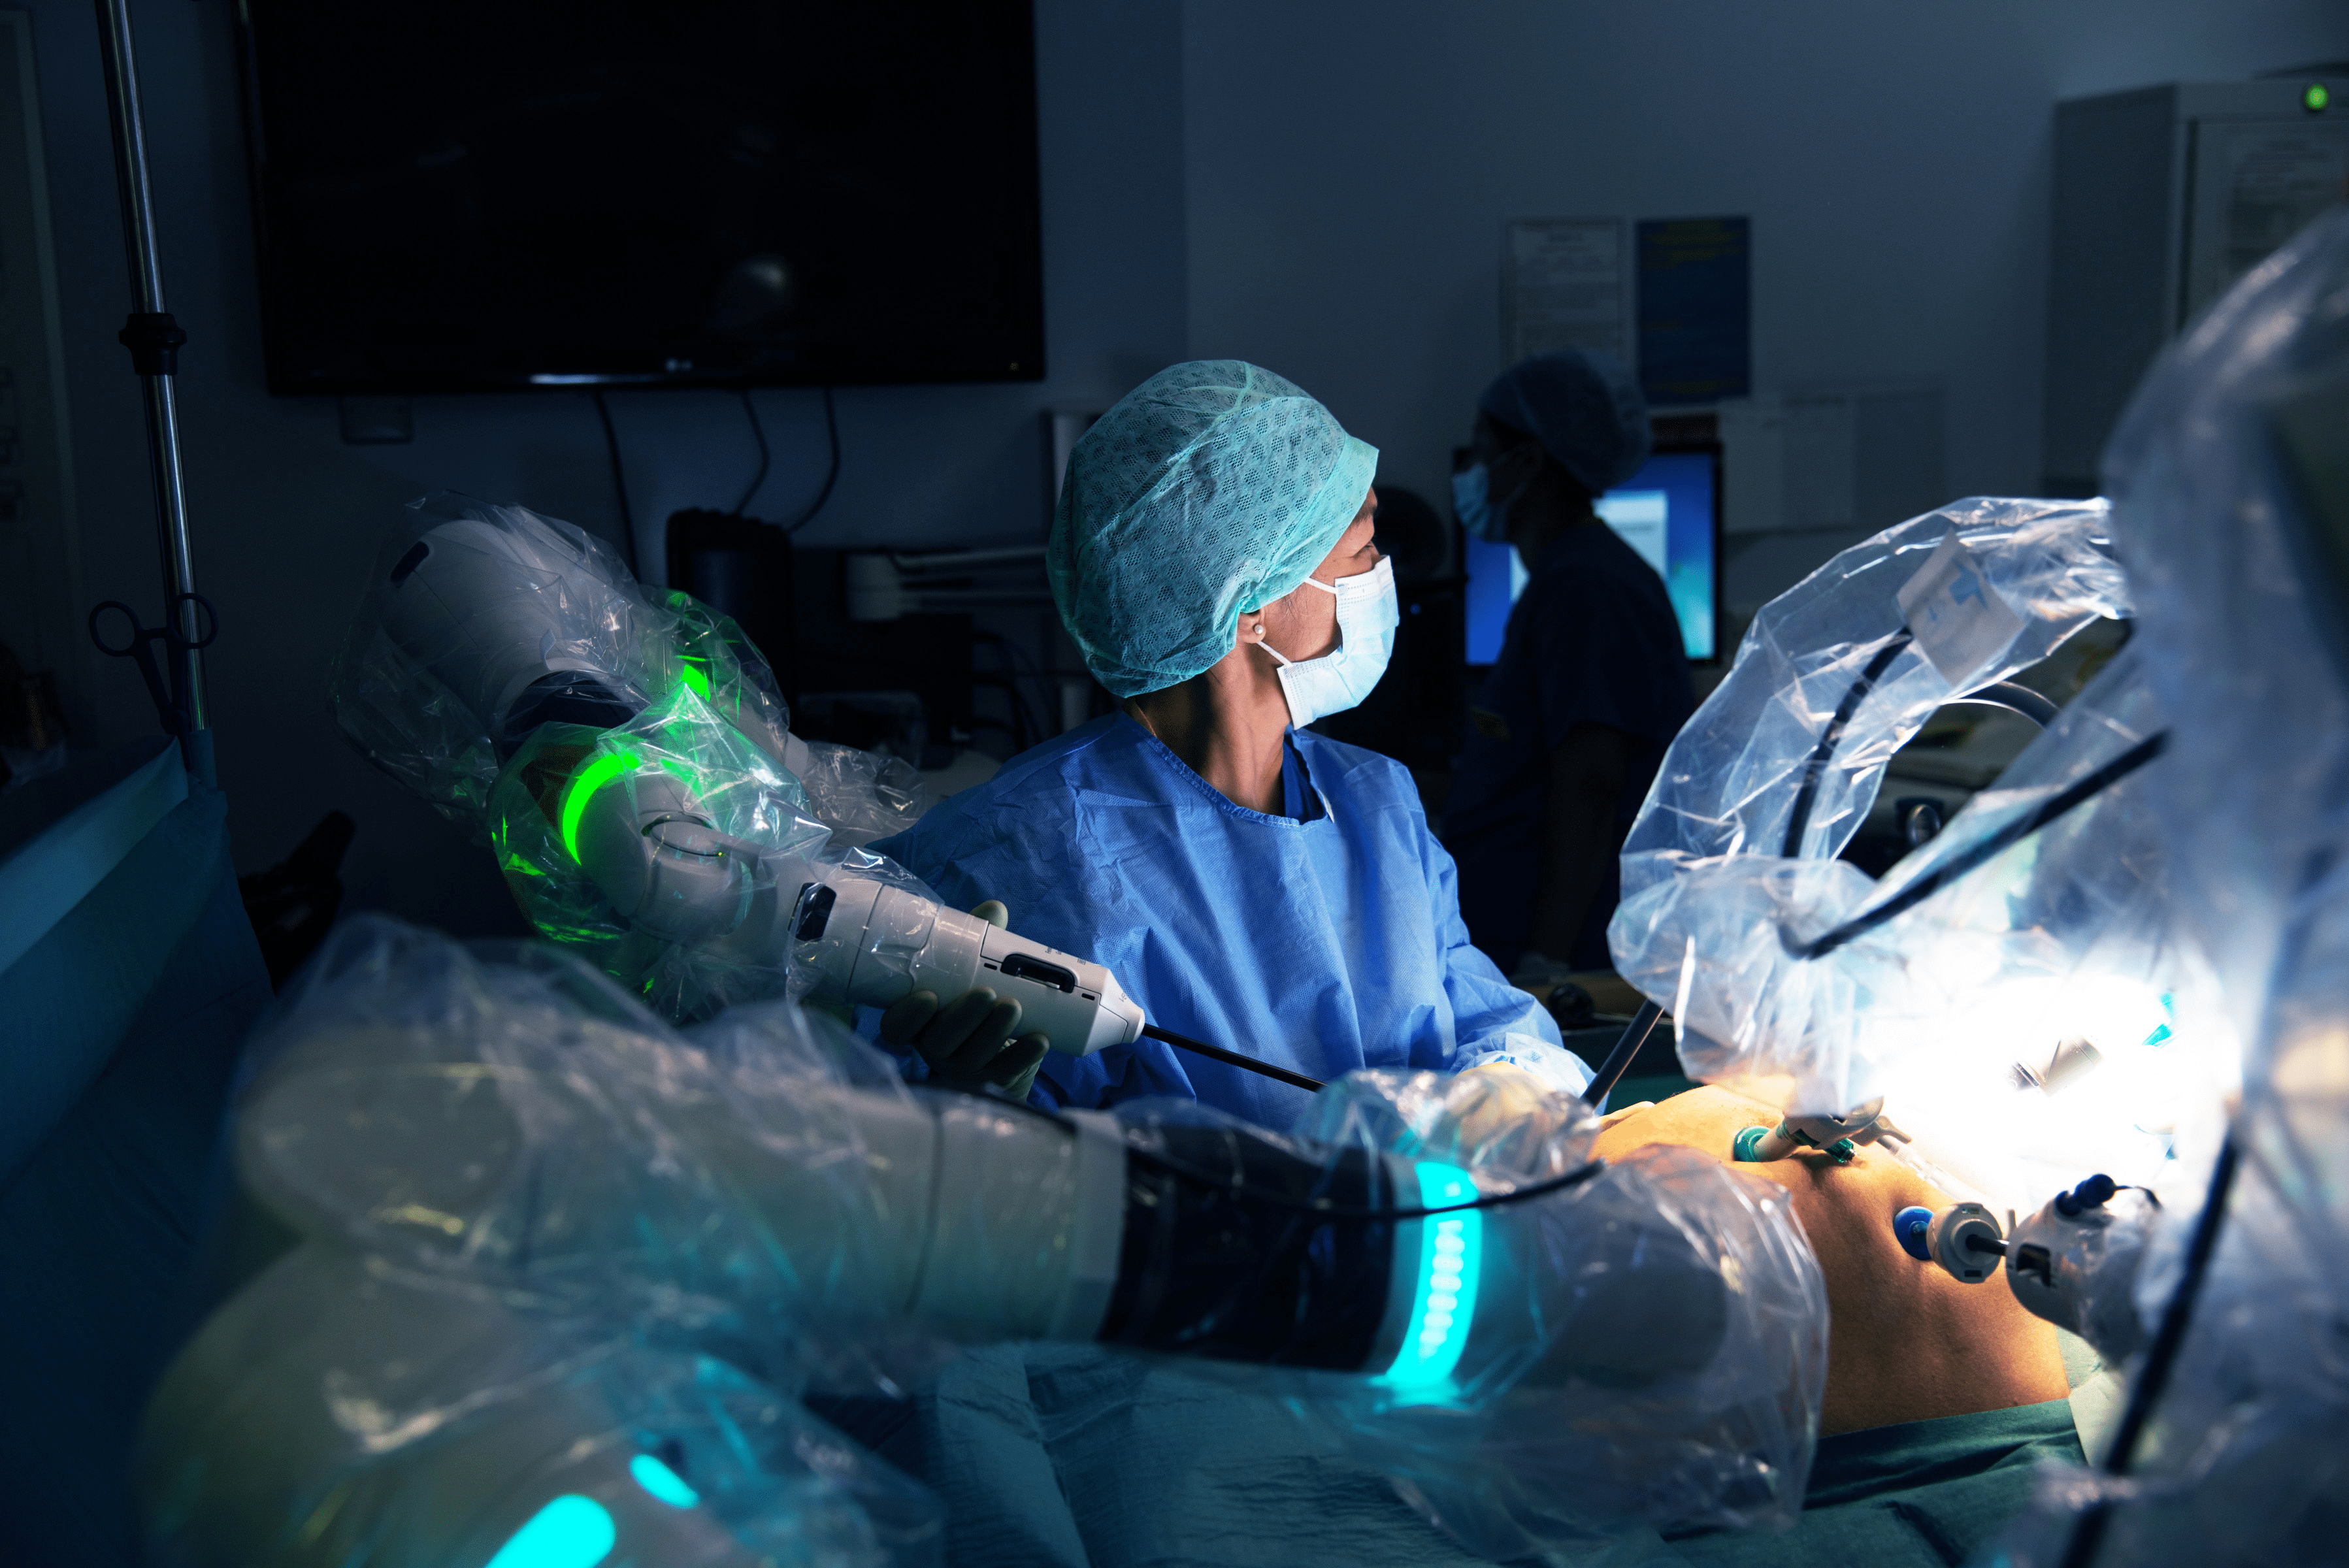 Versius surgical robotic system in operating theater - NU Hospitals